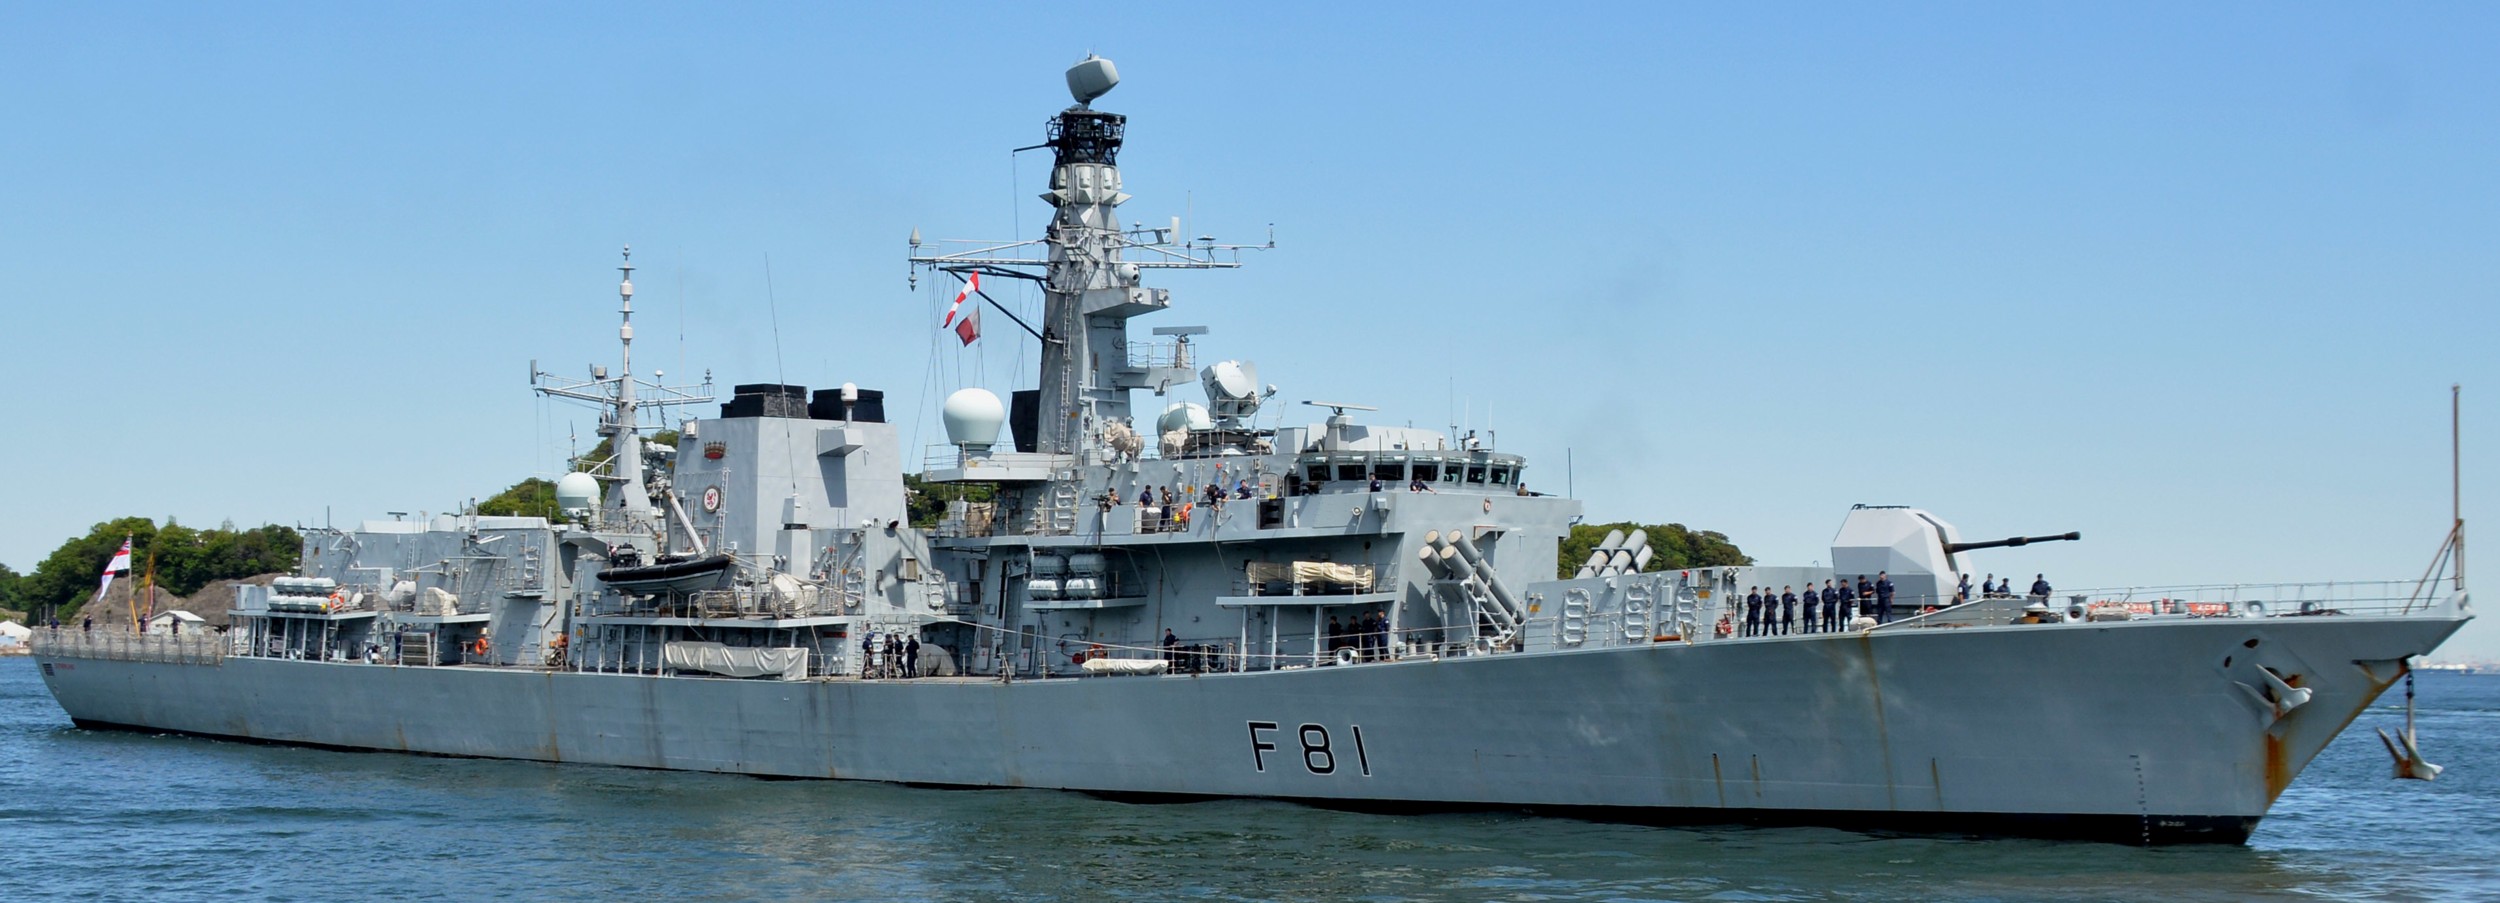 f-81 hms sutherland type 23 duke class guided missile frigate ffg royal navy 59